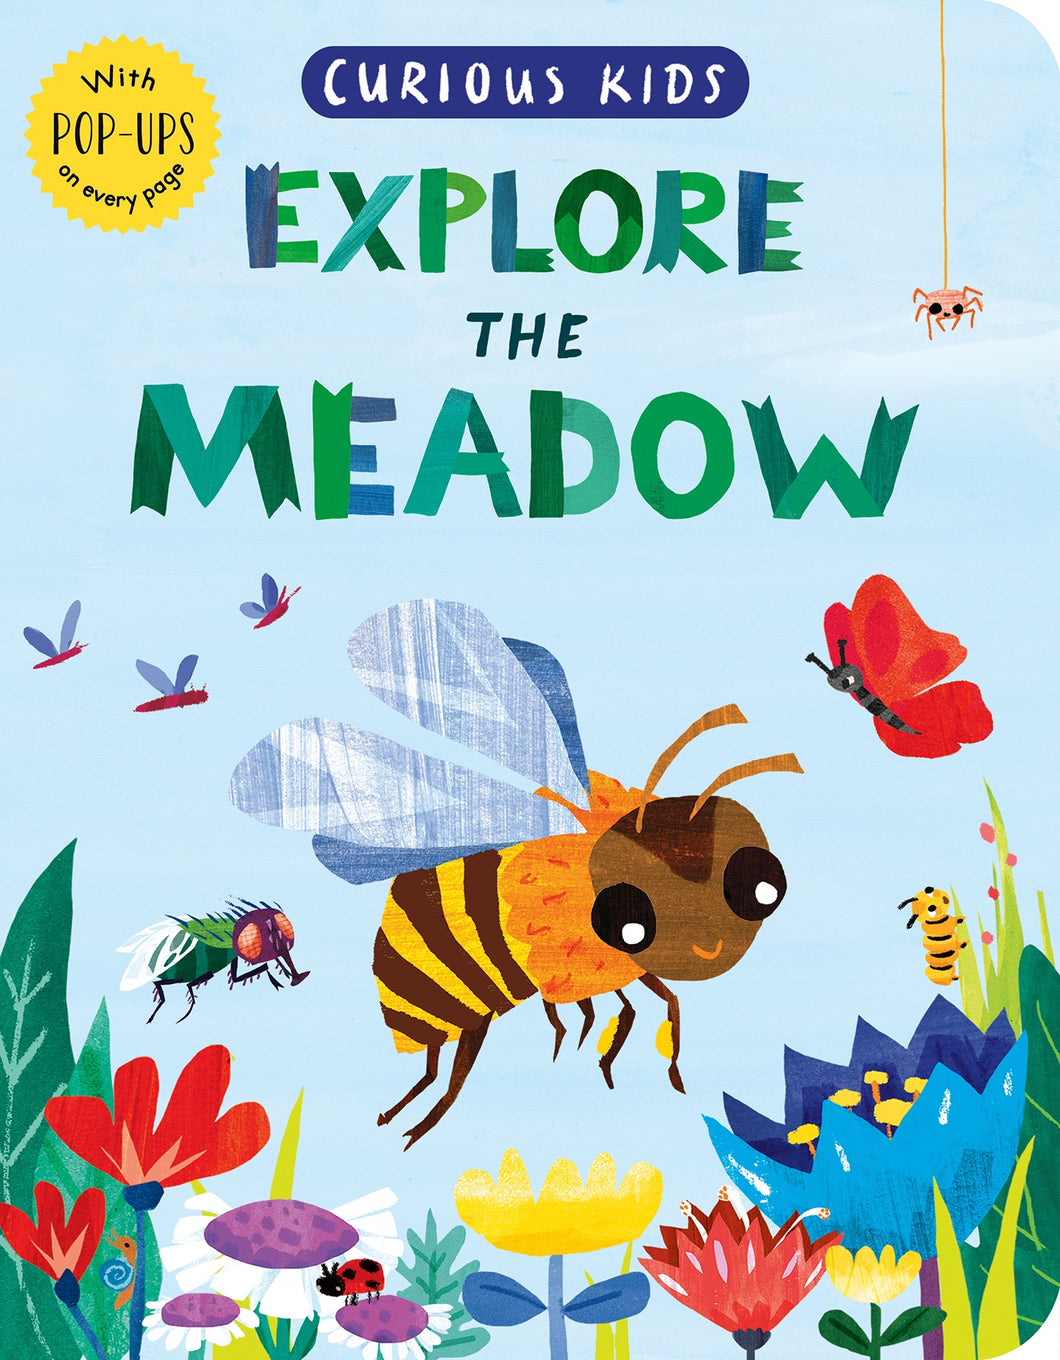 Curious Kids: Explore the Meadow